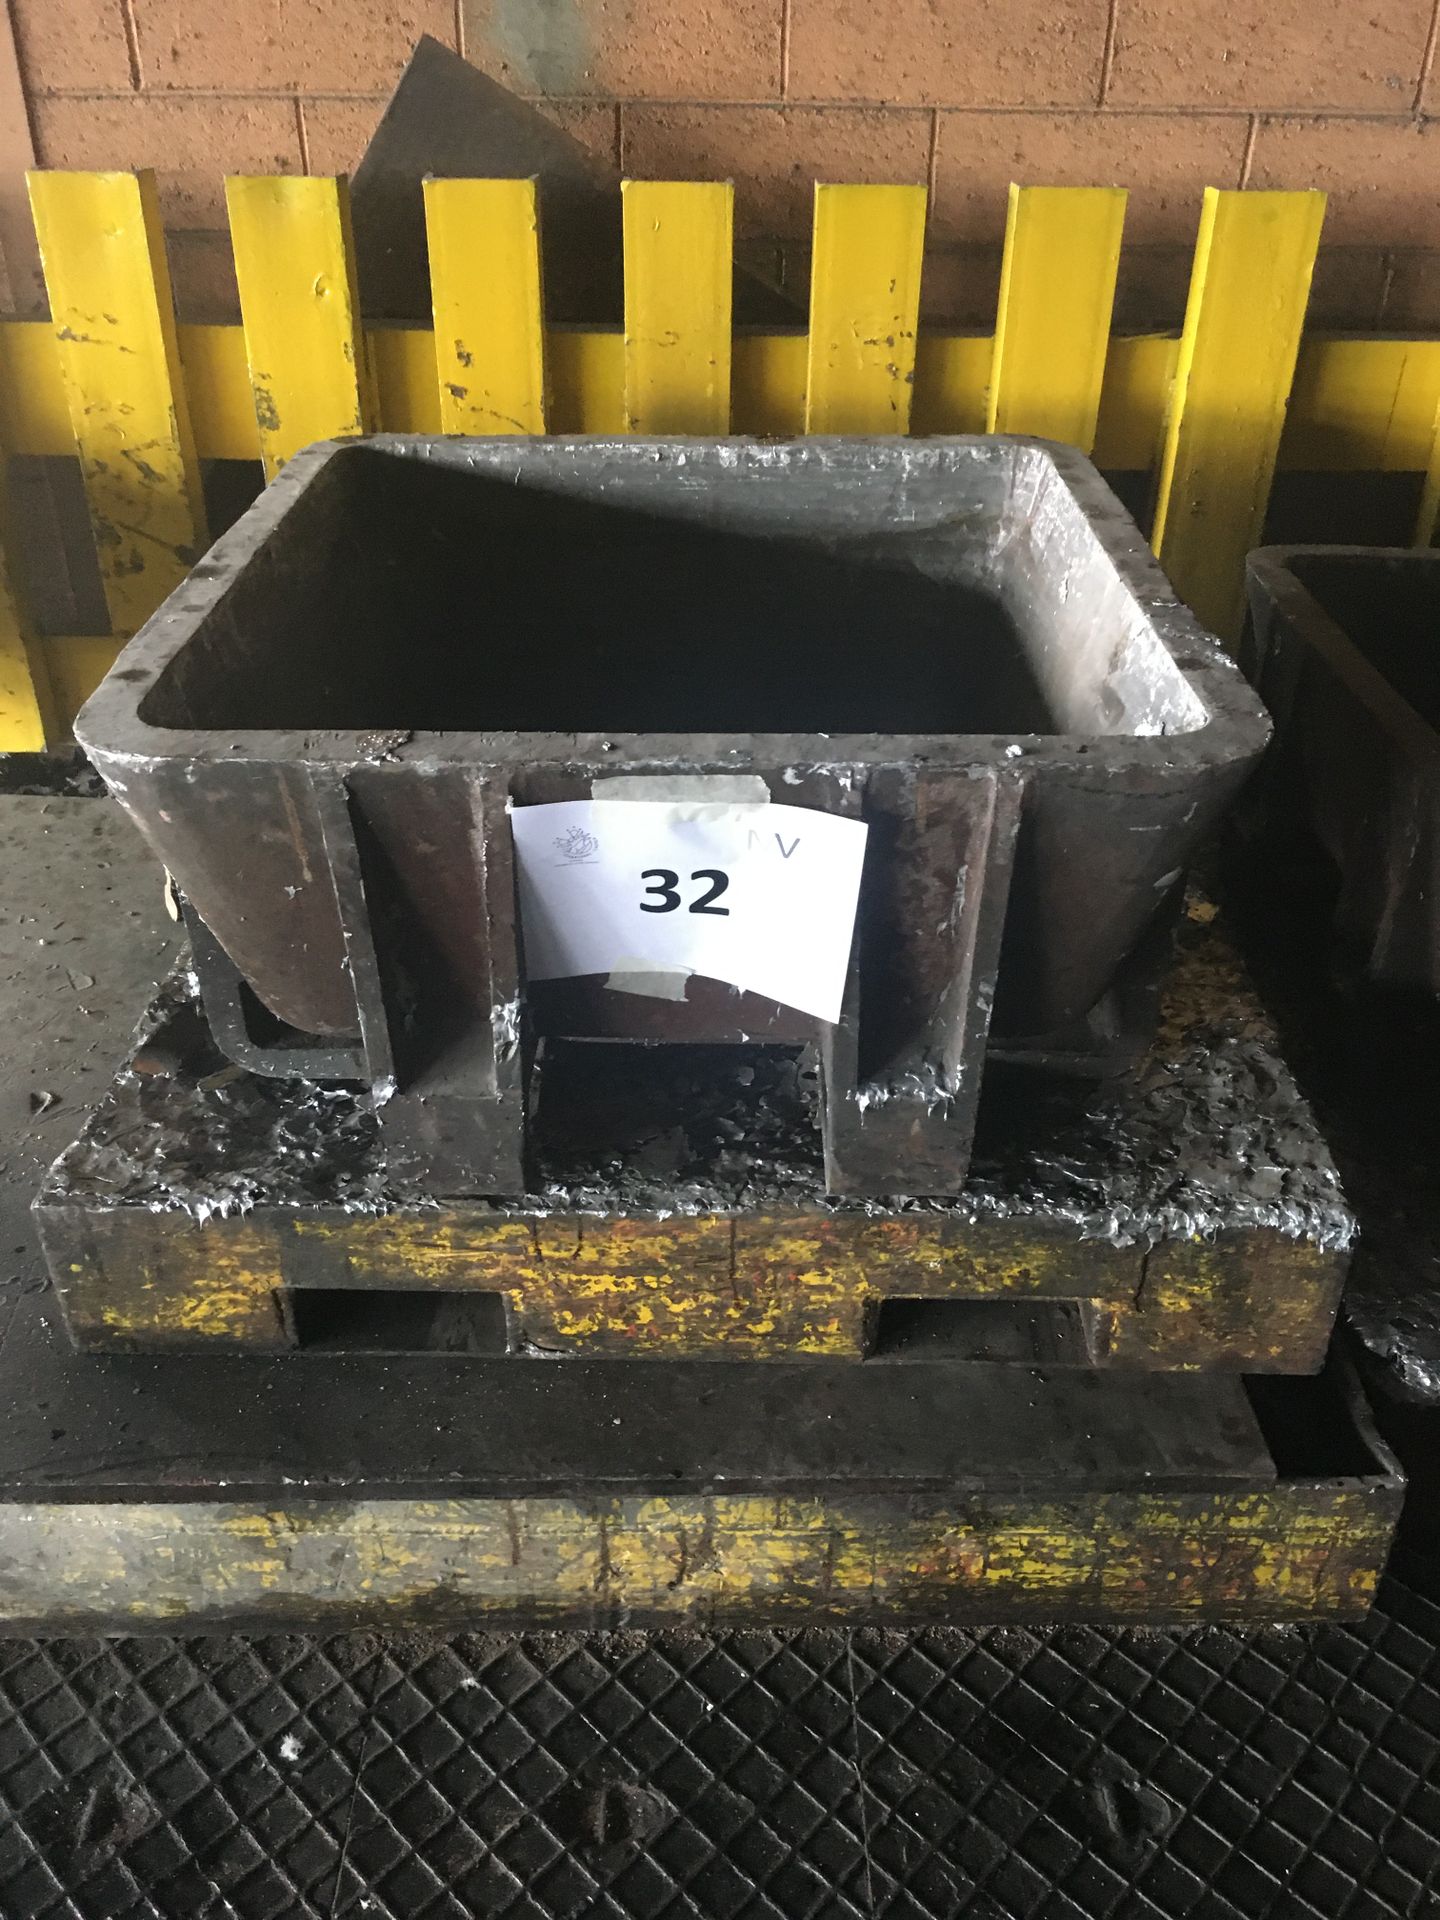 Null 1 cast iron ingot mould brand PYROTEC, year 2015, serial number C 5901, cap&hellip;